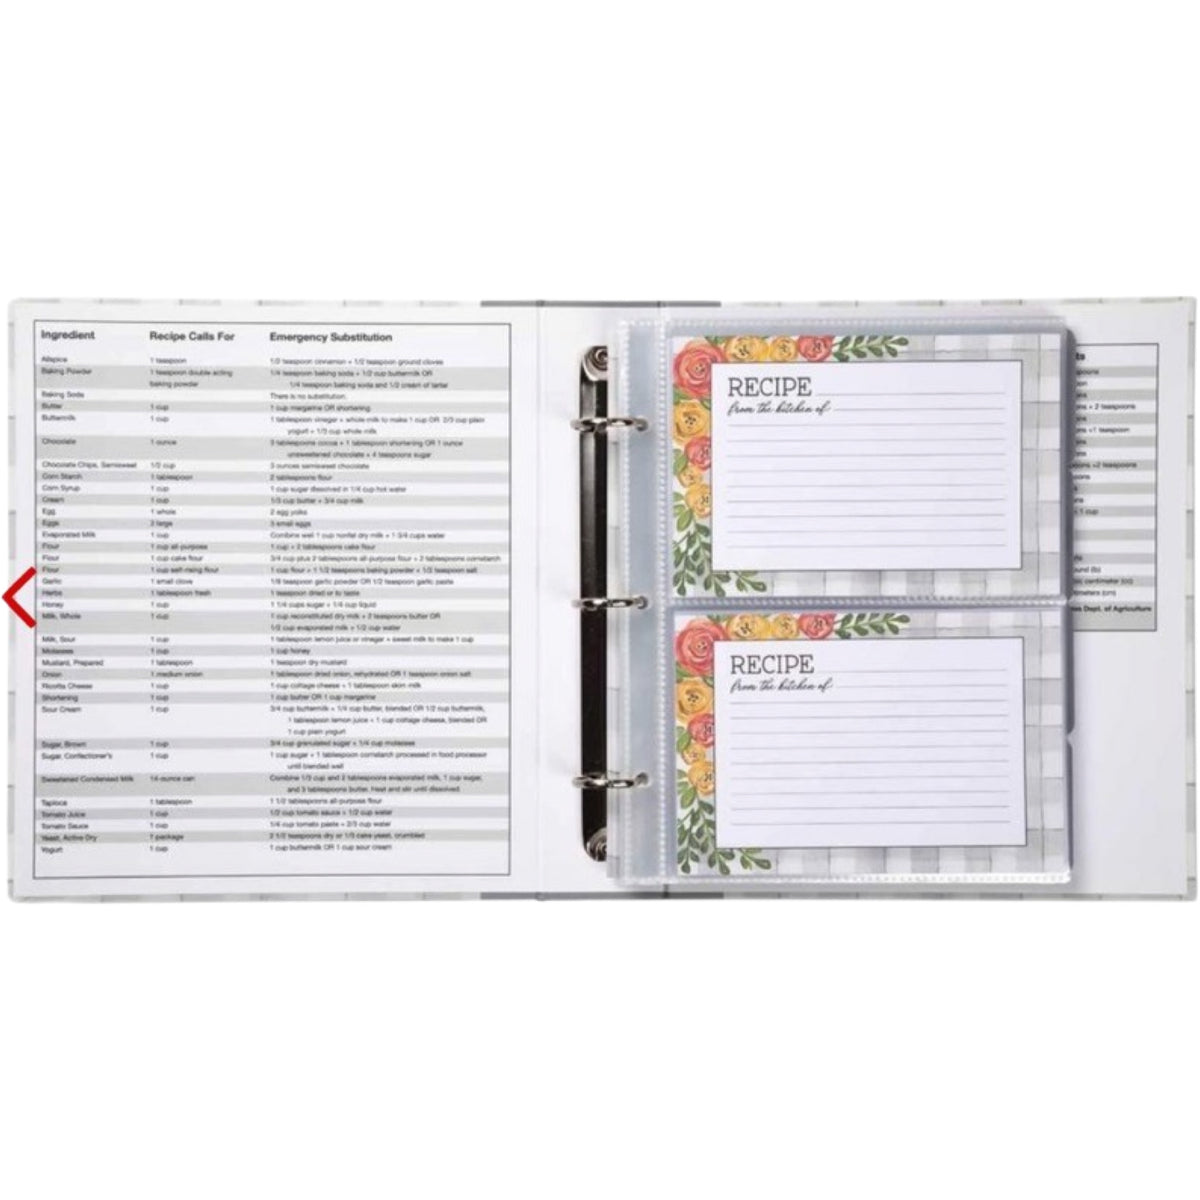 Recipe Storage Binder Includes 20 Lined Cards w/Clear Acrylic Sheets, Dividers & More!